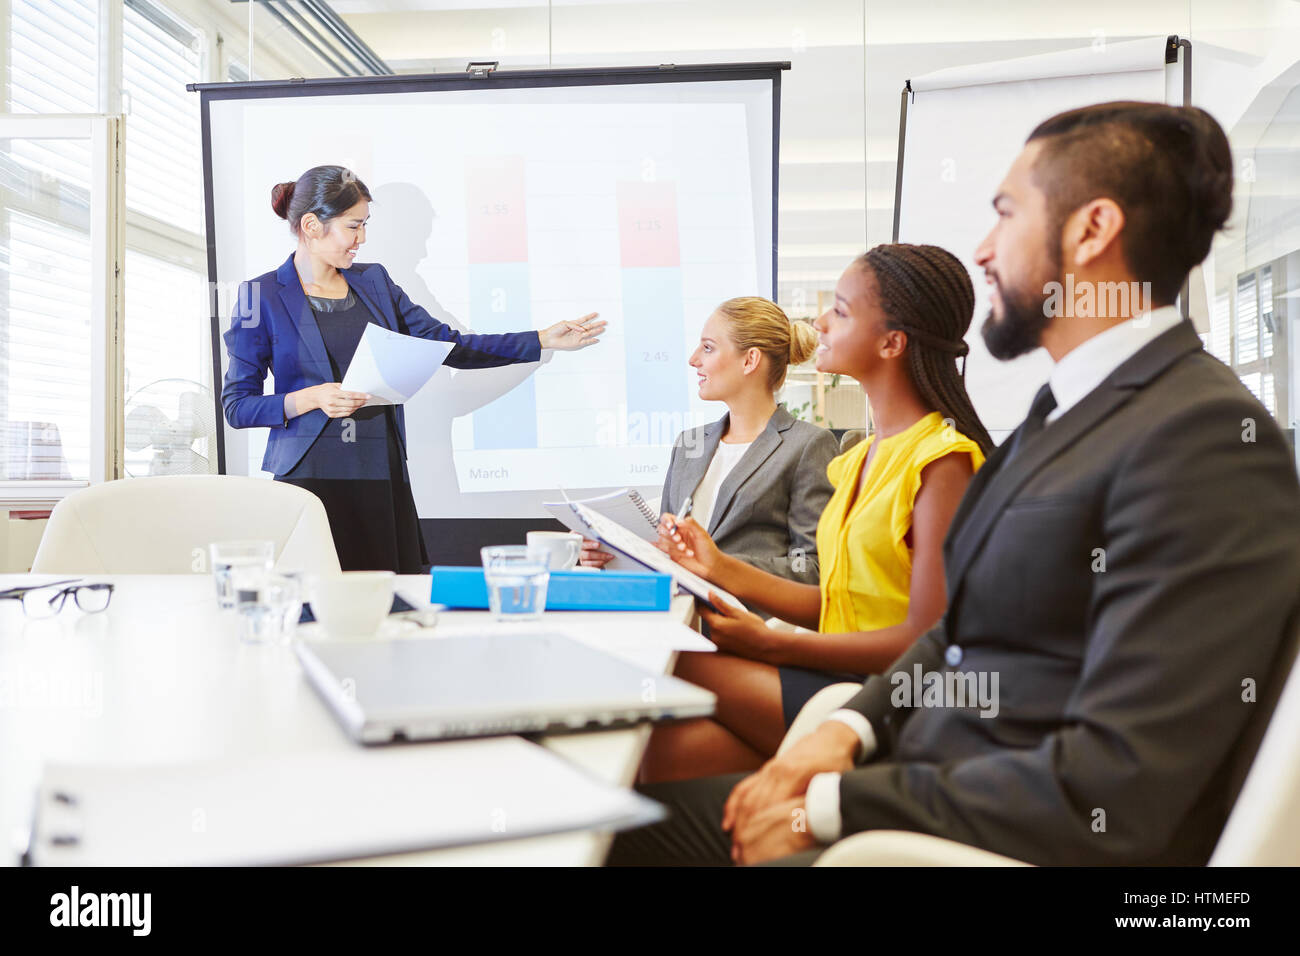 Lecturer giving presentation in business seminar with flip chart and whiteboard Stock Photo